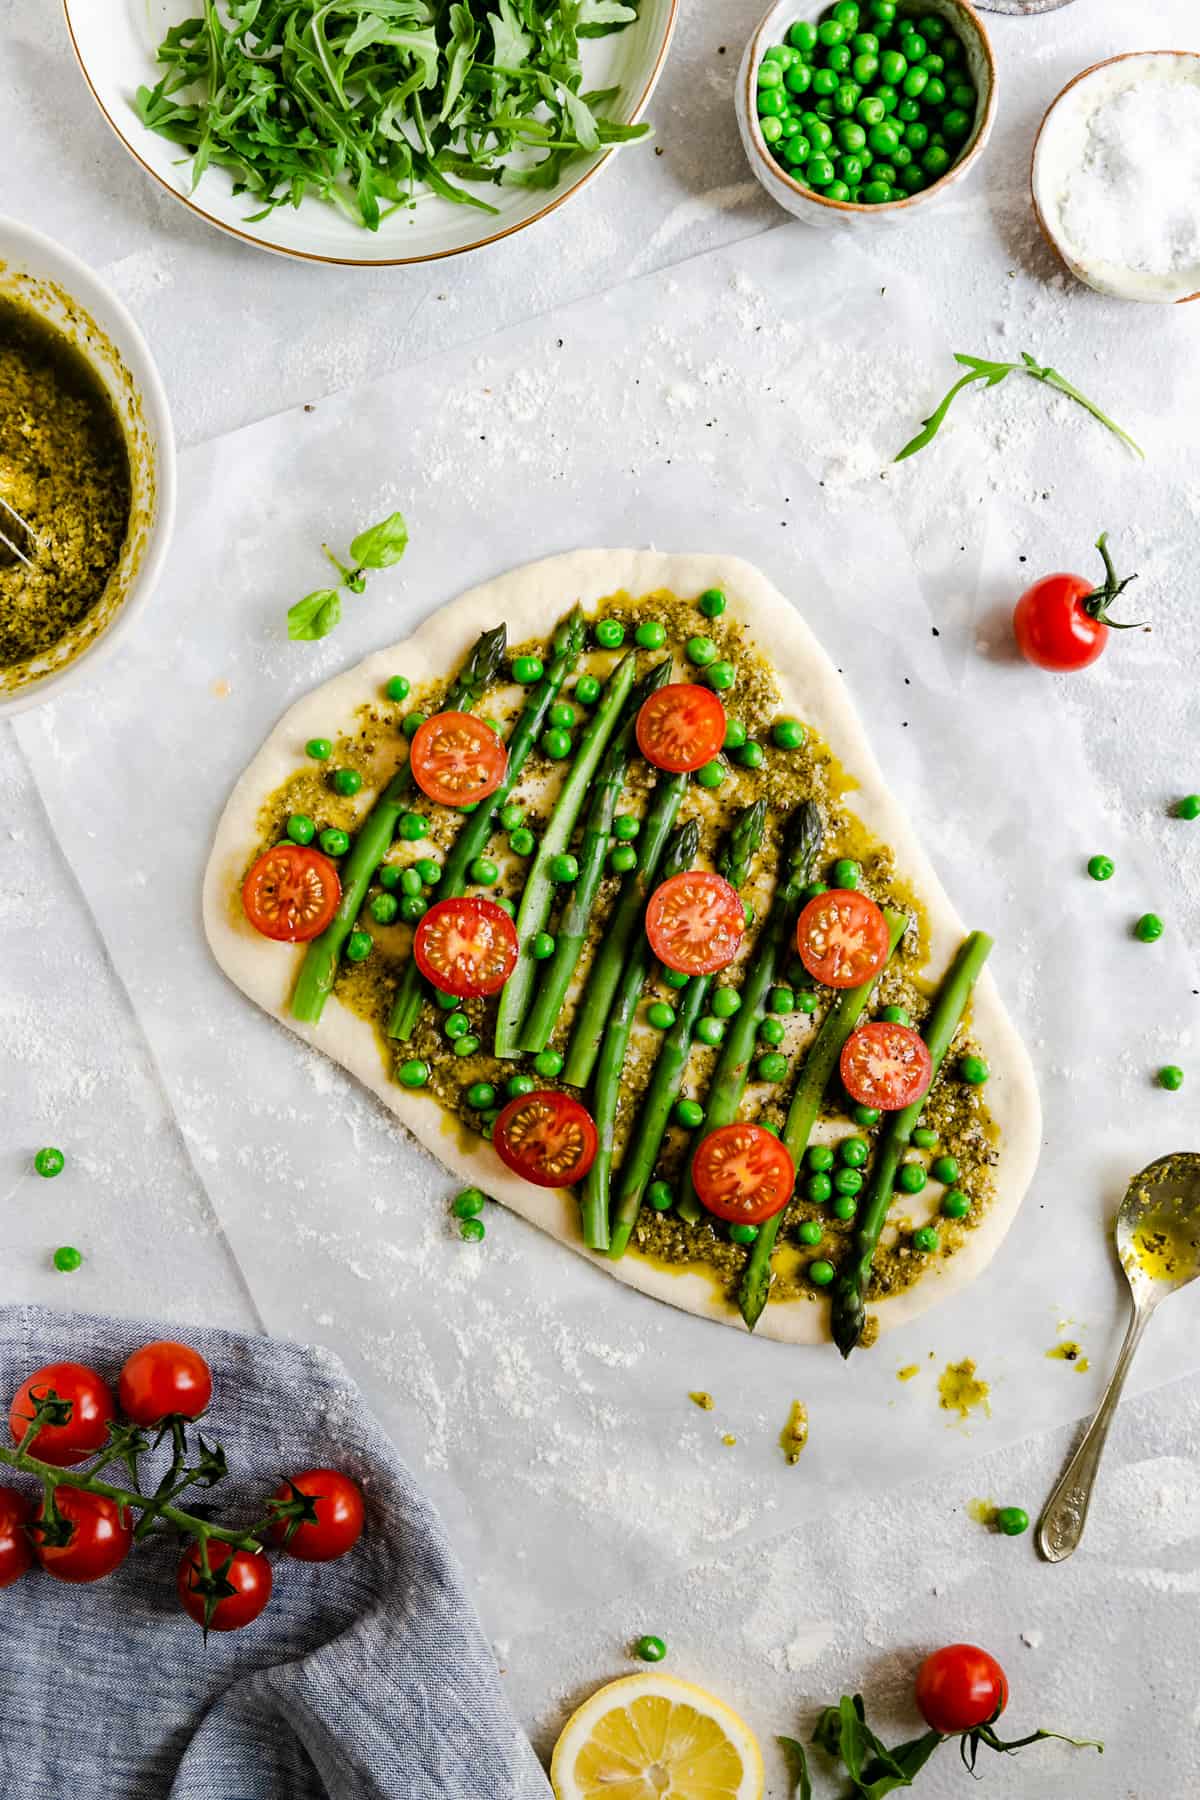 Top view of pizza dough topped with green pesto, asparagus, green peas and cherry tomatoes